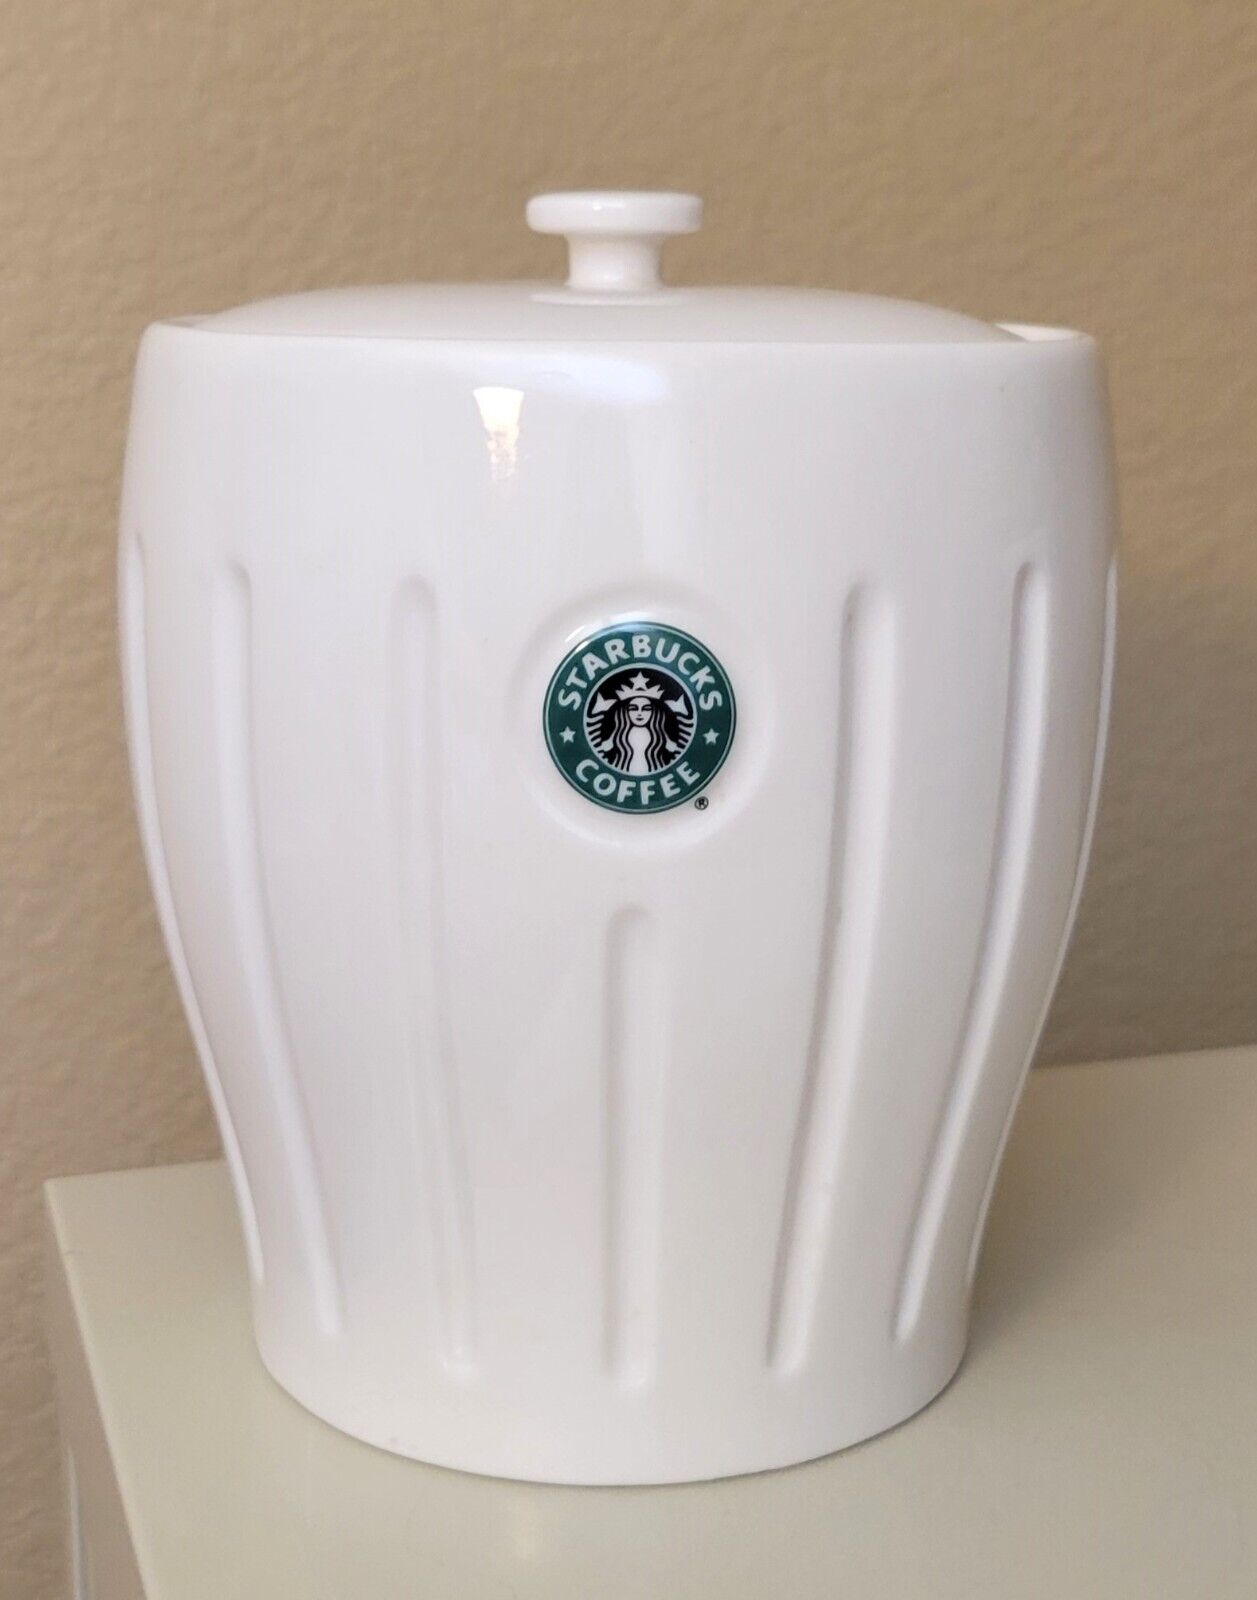 STARBUCKS Barista Logo 2003 Ribbed Coffee Canister Cookie Jar With Lid White